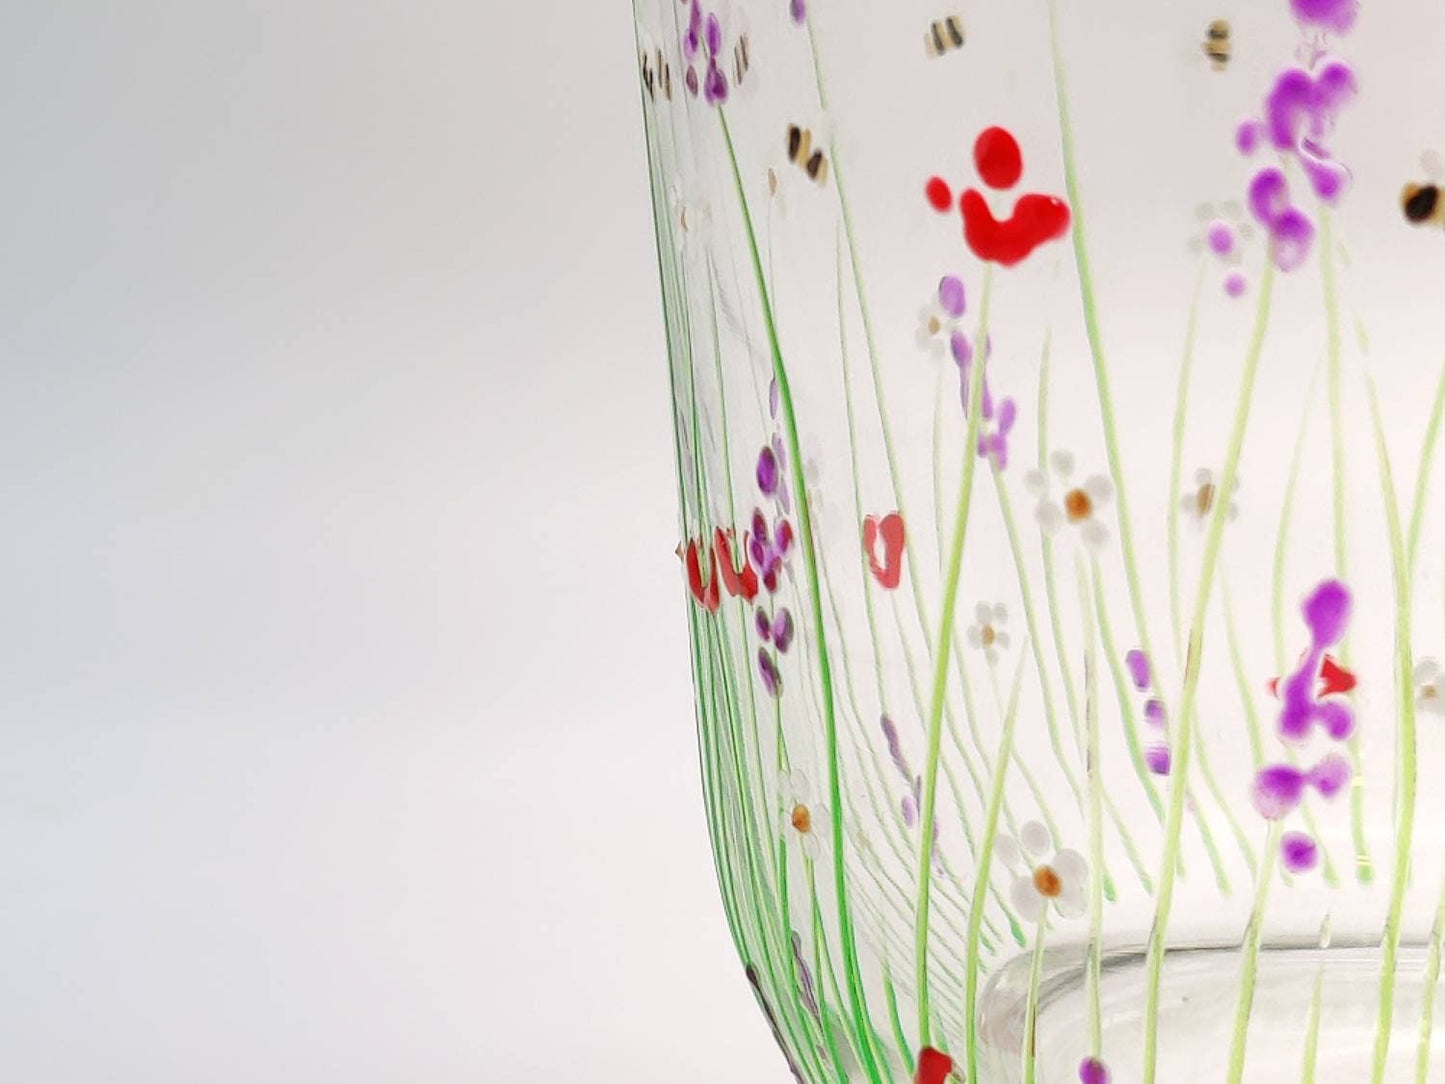 Hand-painted 'Summer meadow' Glass Vase/ Candle Holder